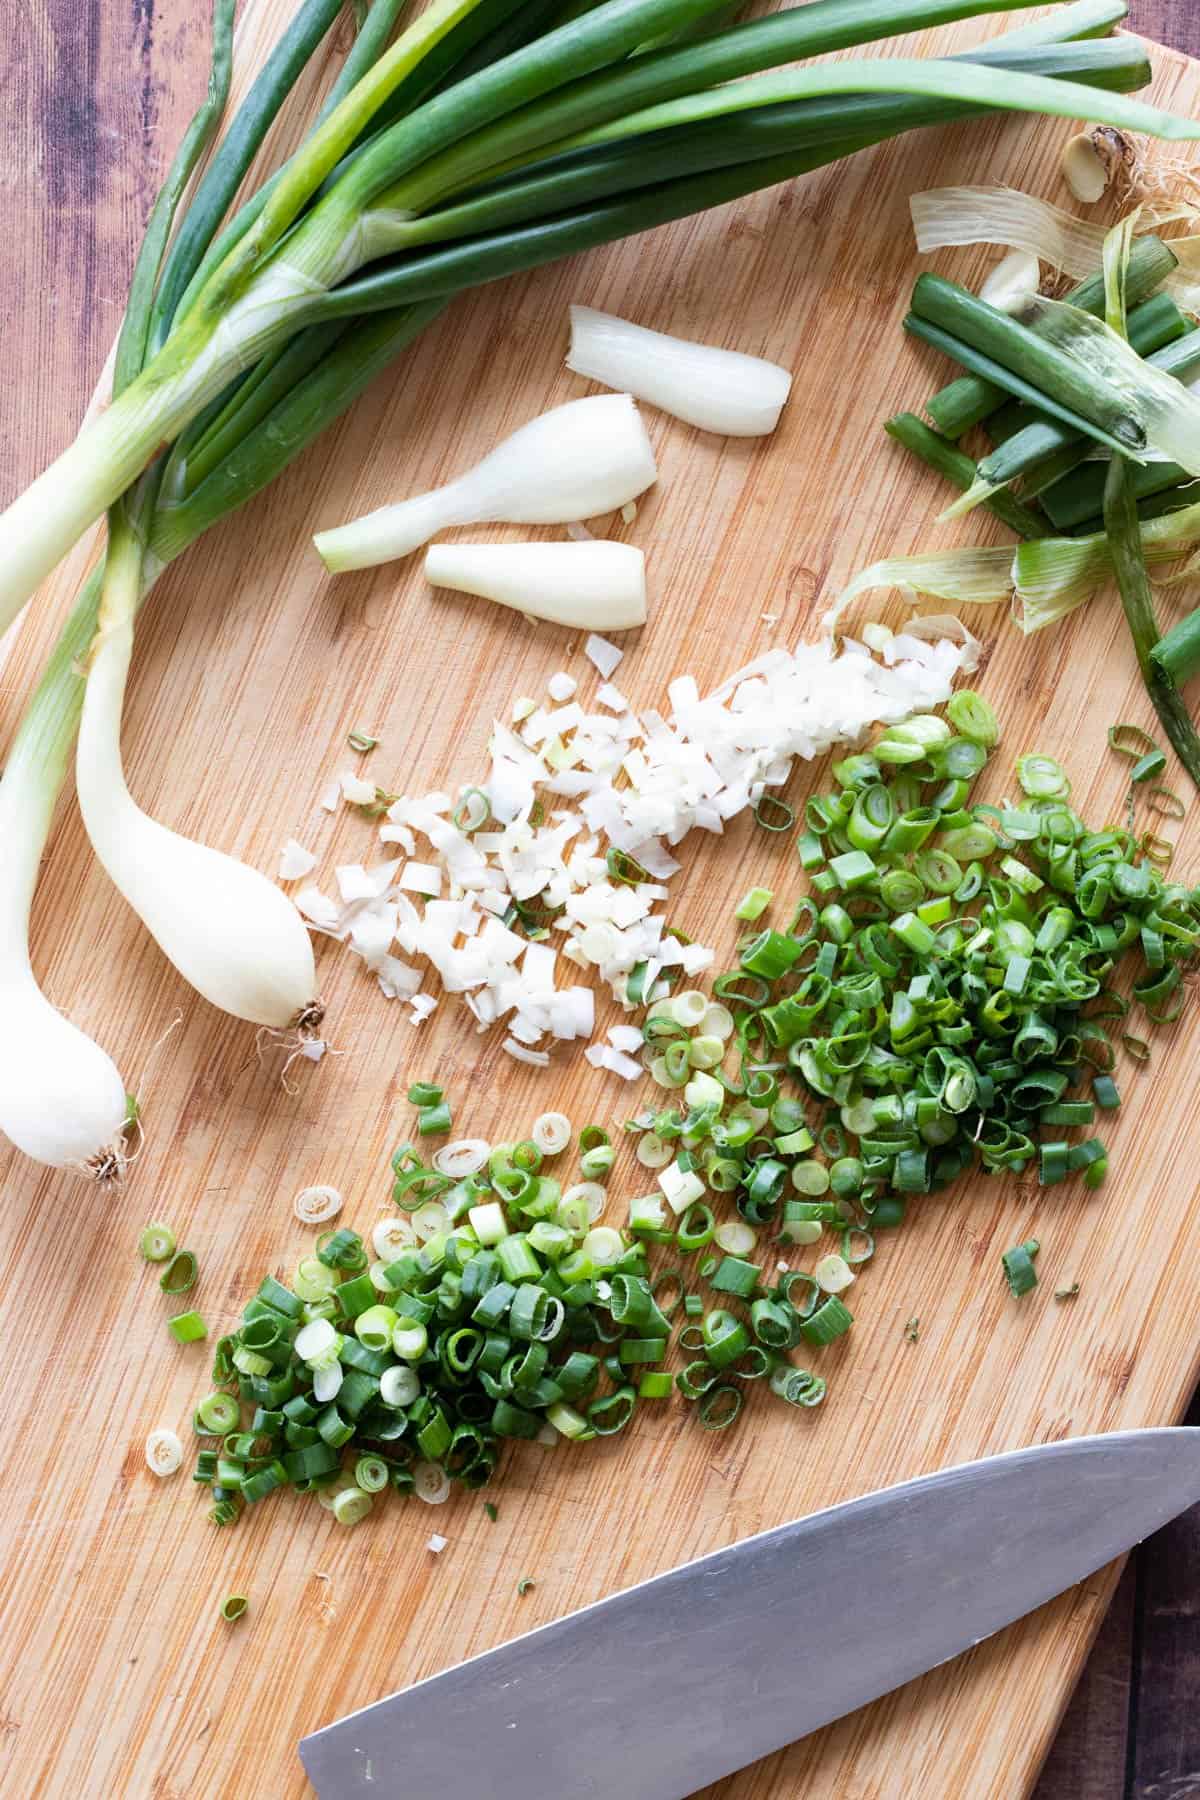 Whole and sliced green onions on a chopping board.